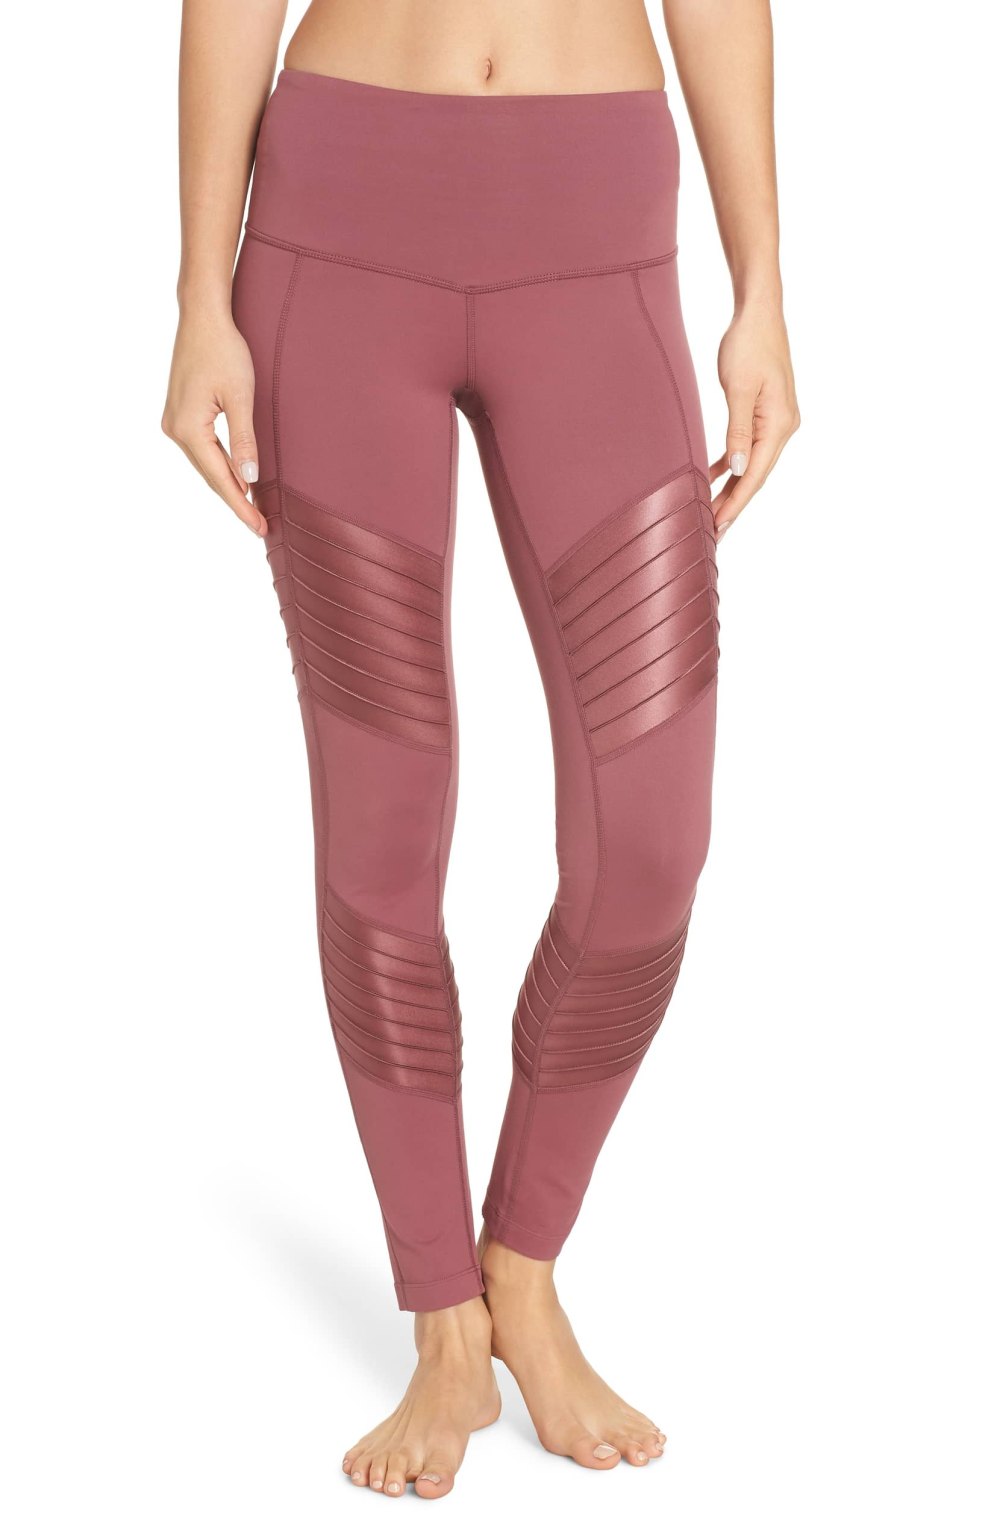 pink moto style leggings from the Zella brand at Nordstrom